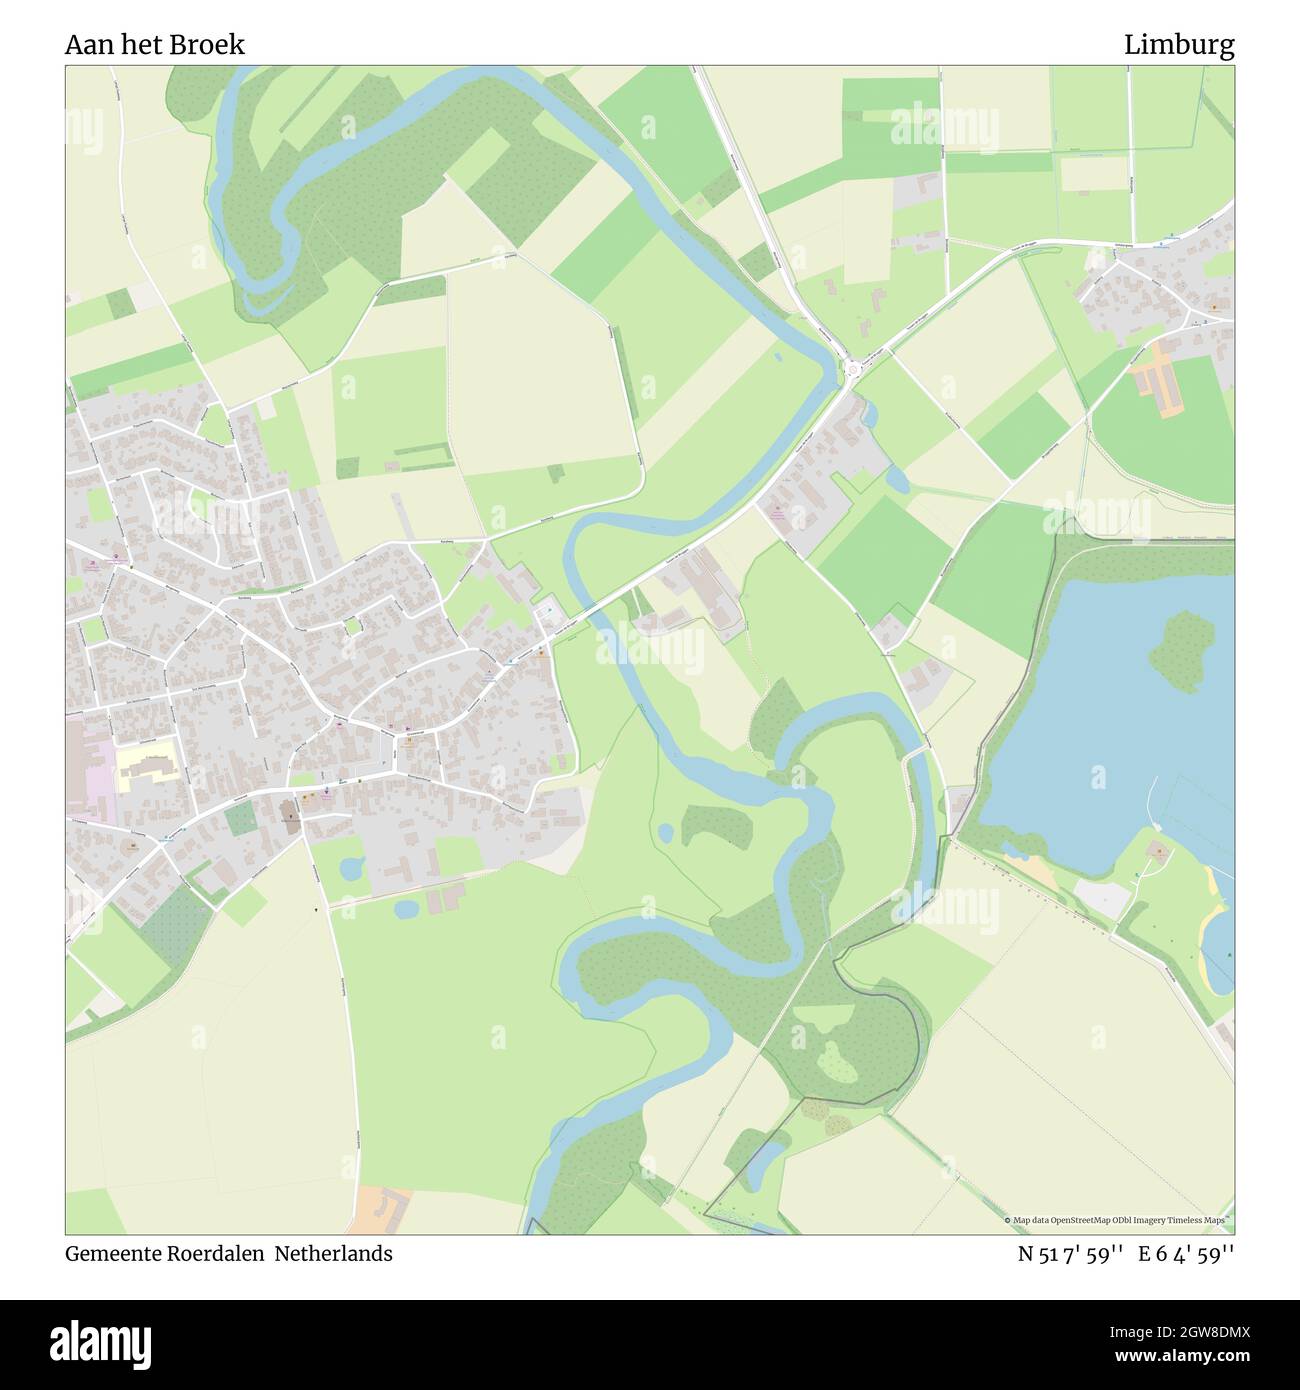 Aan het Broek, Gemeente Roerdalen, Netherlands, Limburg, N 51 7' 59'', E 6 4' 59'', map, Timeless Map published in 2021. Travelers, explorers and adventurers like Florence Nightingale, David Livingstone, Ernest Shackleton, Lewis and Clark and Sherlock Holmes relied on maps to plan travels to the world's most remote corners, Timeless Maps is mapping most locations on the globe, showing the achievement of great dreams Stock Photo